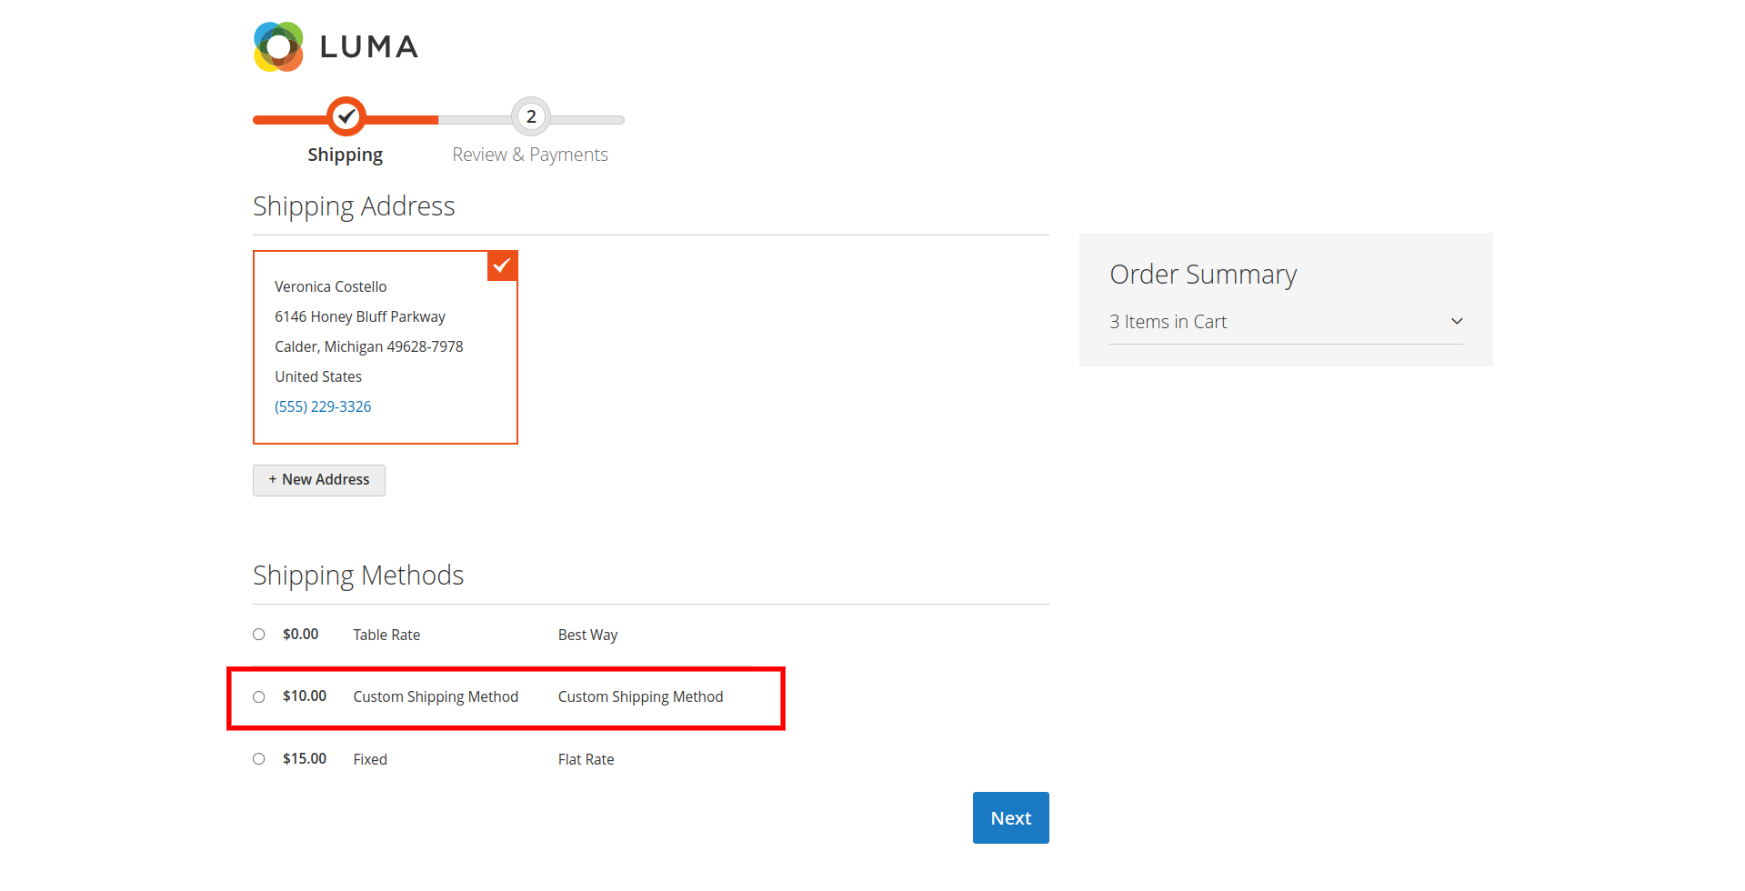 How to Create Custom Shipping Method in Magento 2